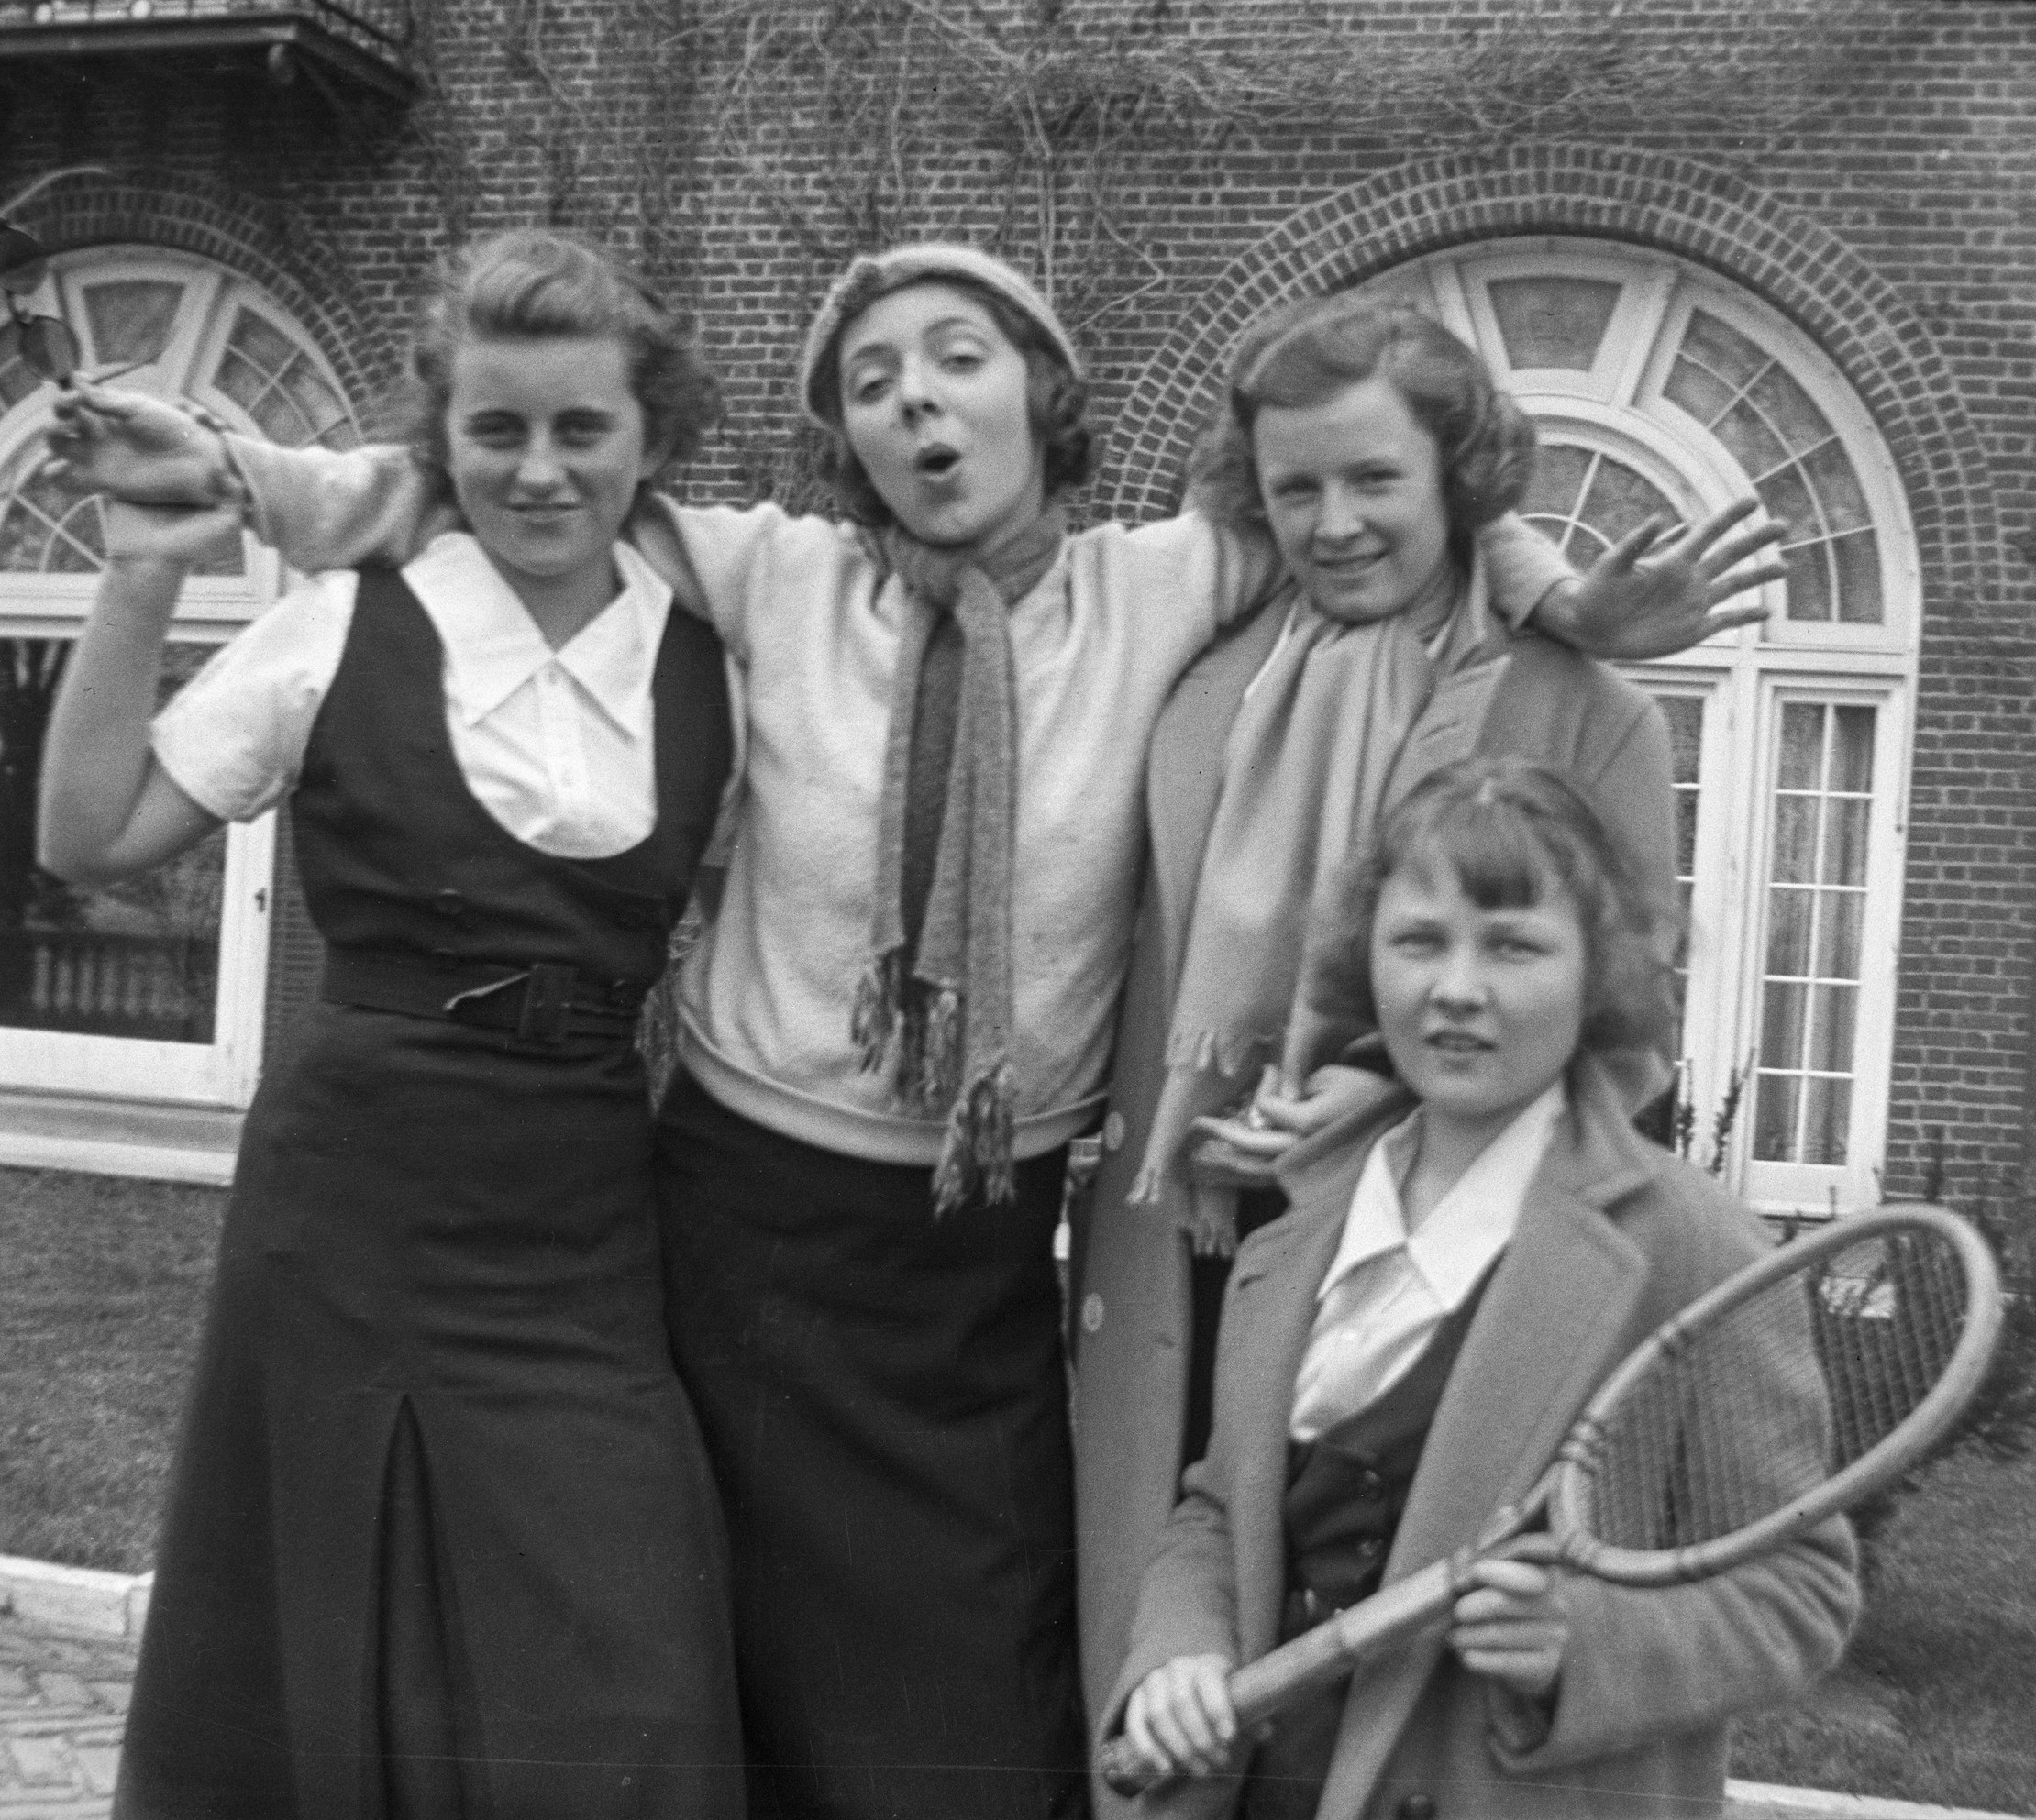 A black and white photo of four adolescent girls in skirts and curled hair posing in front of a brick building. One stands in center, her arms around the others’ shoulders, hand held by the girl left of her, and another is in front with a tennis racket.